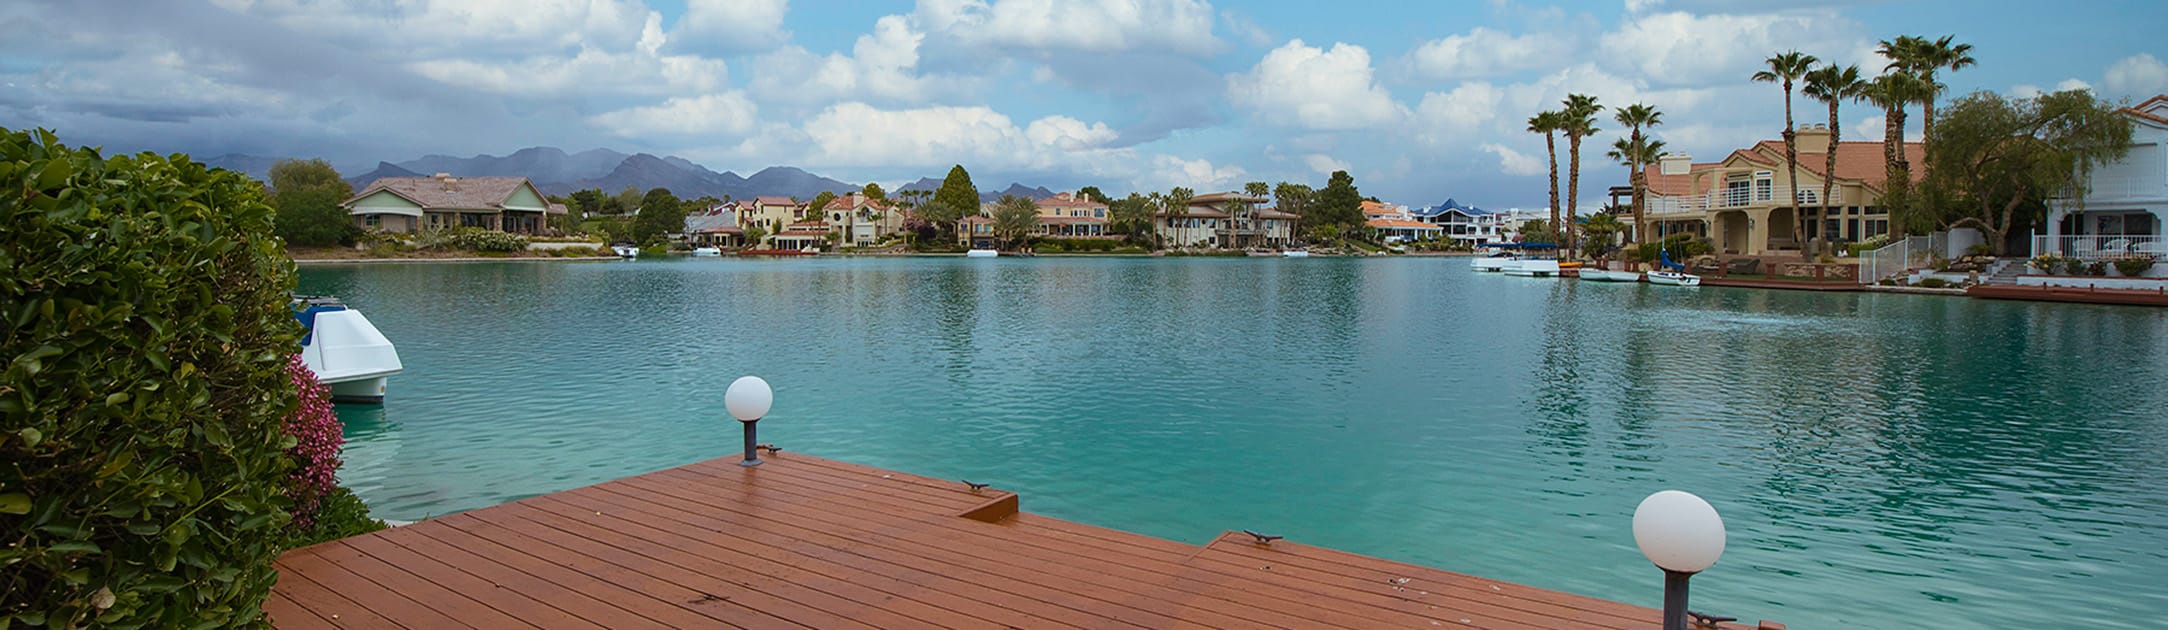 View from boat dock of a lake with luxury homes and palm trees.